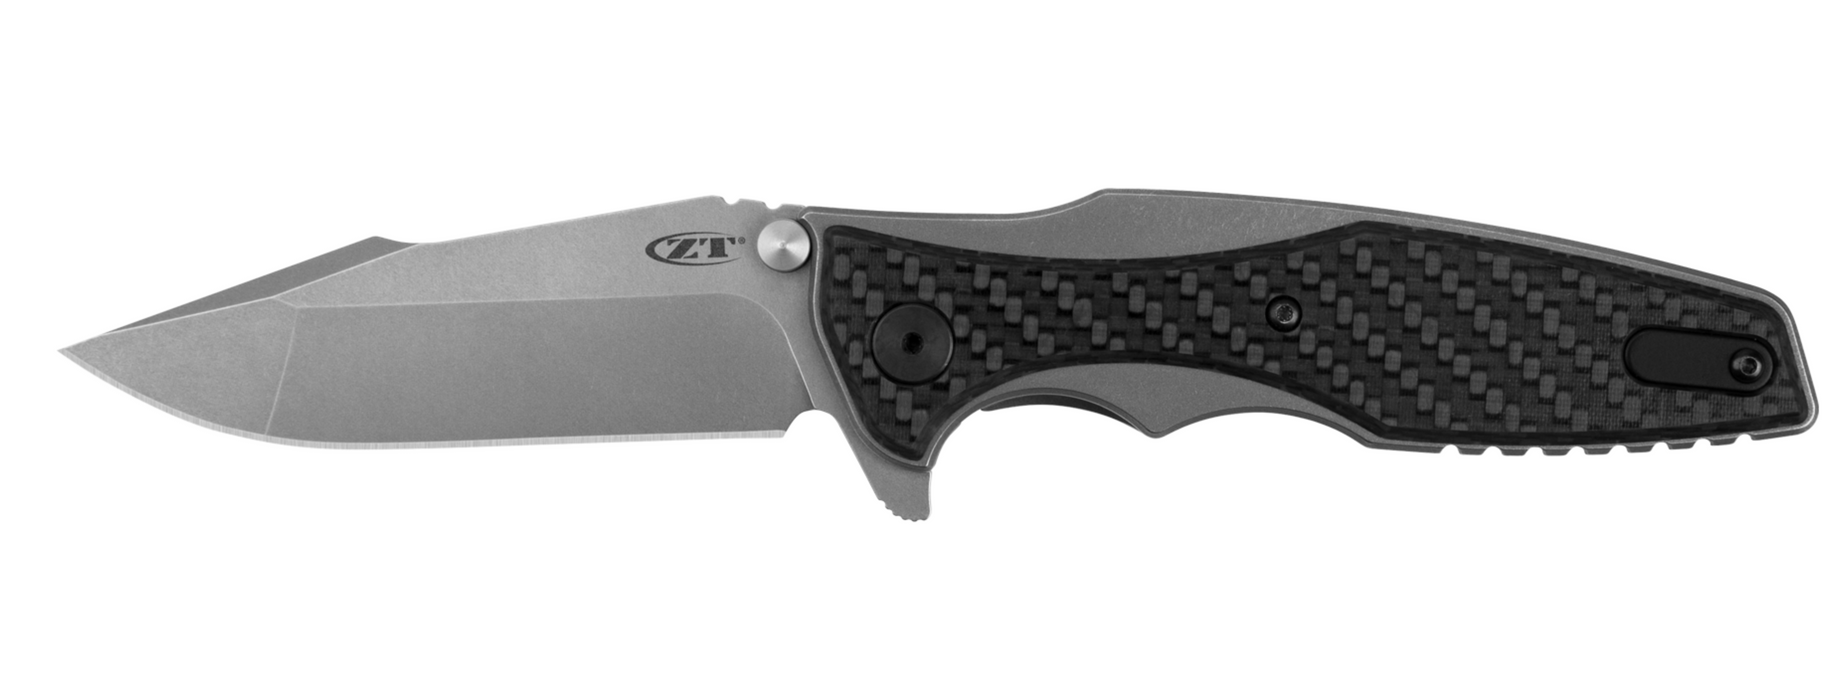 Zero Tolerance Hinderer Glow CF Pocketknife; 3.5-Inch Blade of 20CV Stainless Steel; Titanium Handle Made in The USA (0393GLCF)